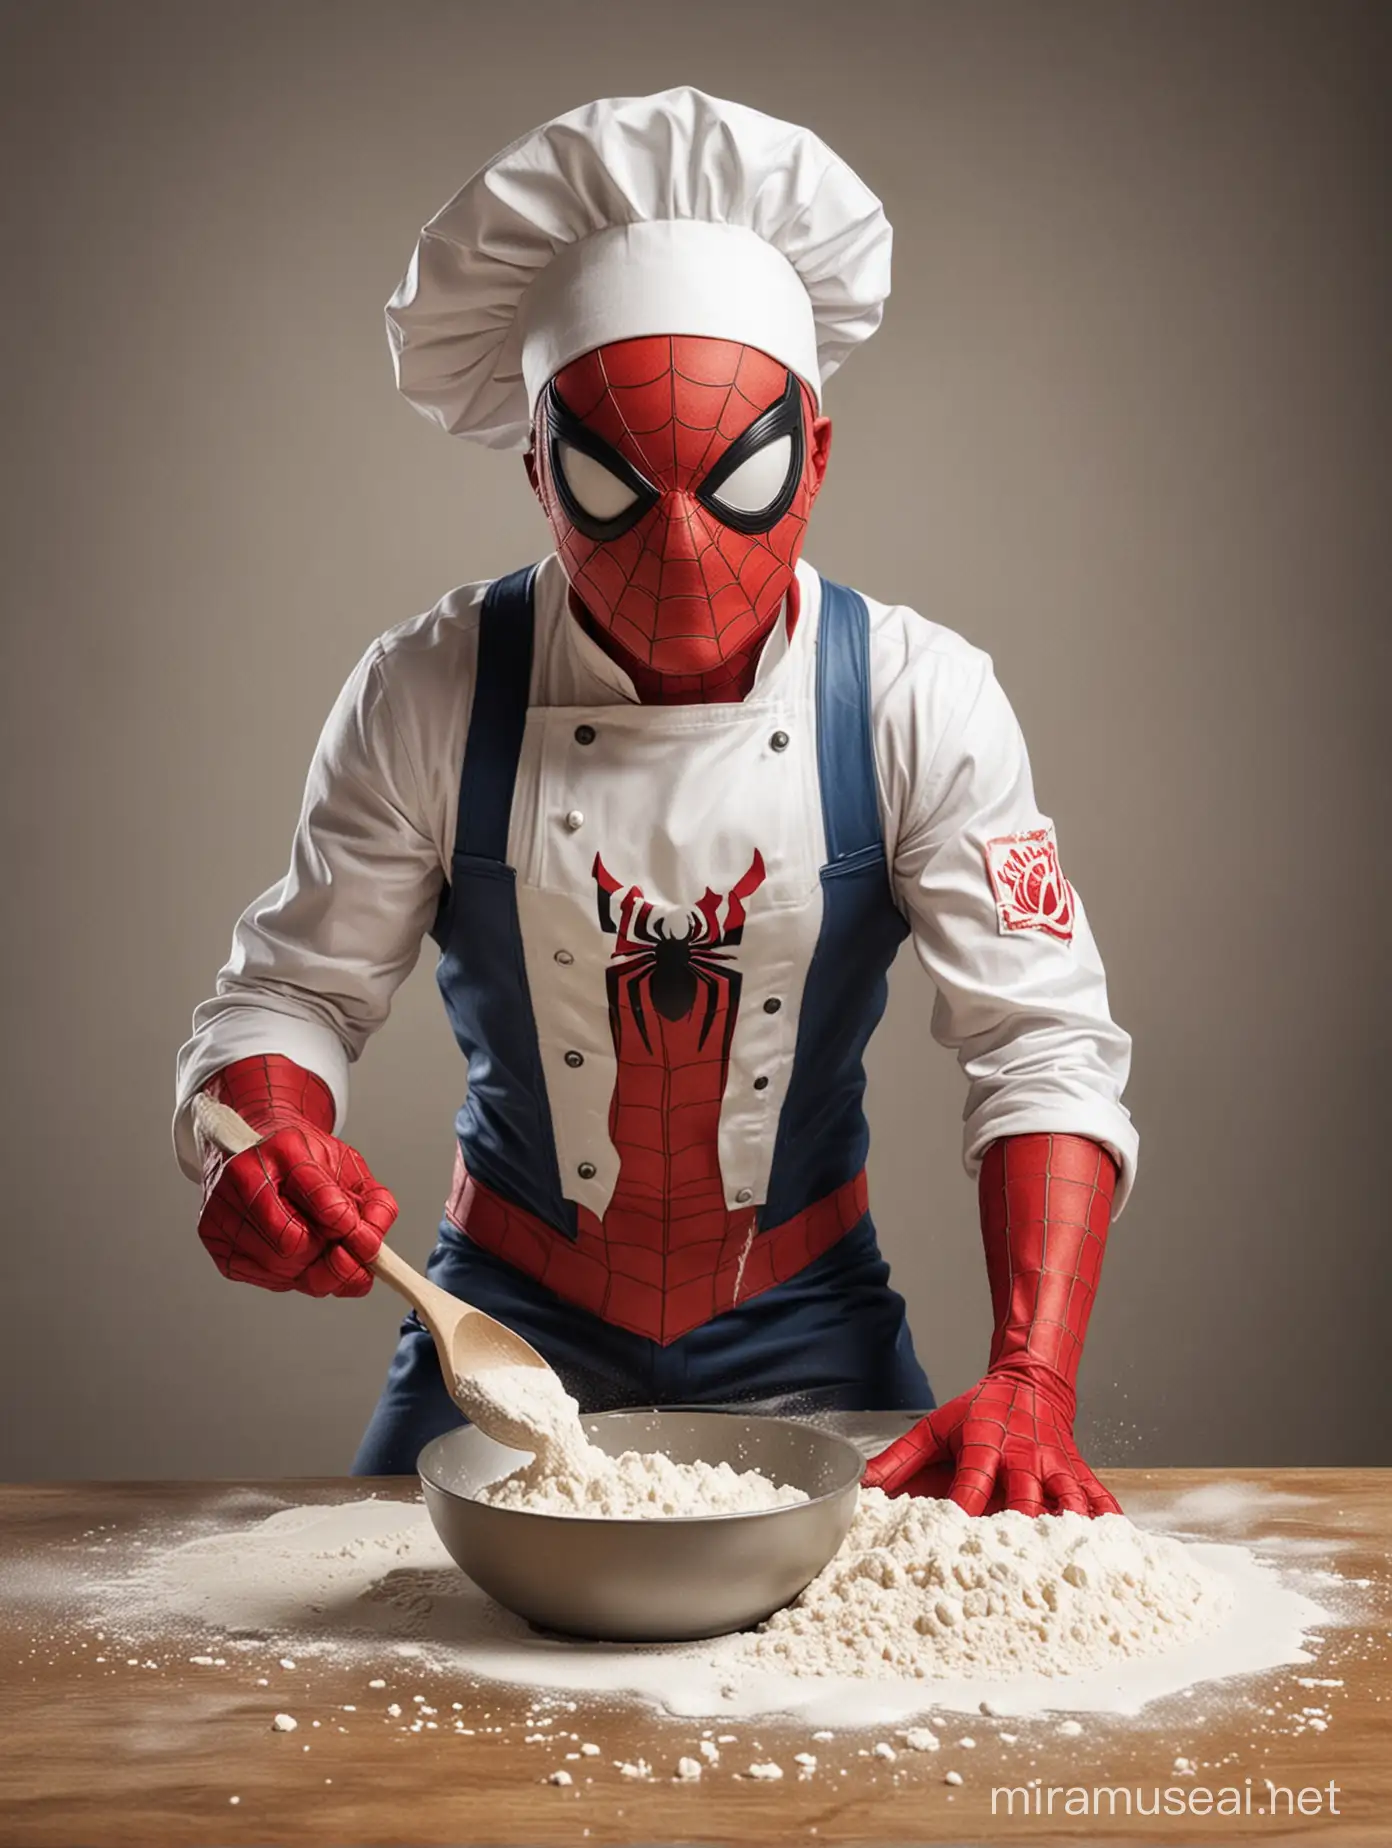 Create a caricature picture of the superhero from Marvel "Spiderman" is seen baking sifting flour worn chef's hat, by maintaining the character of Spiderman, costume and using mask look a like as the original, in a caricature style 